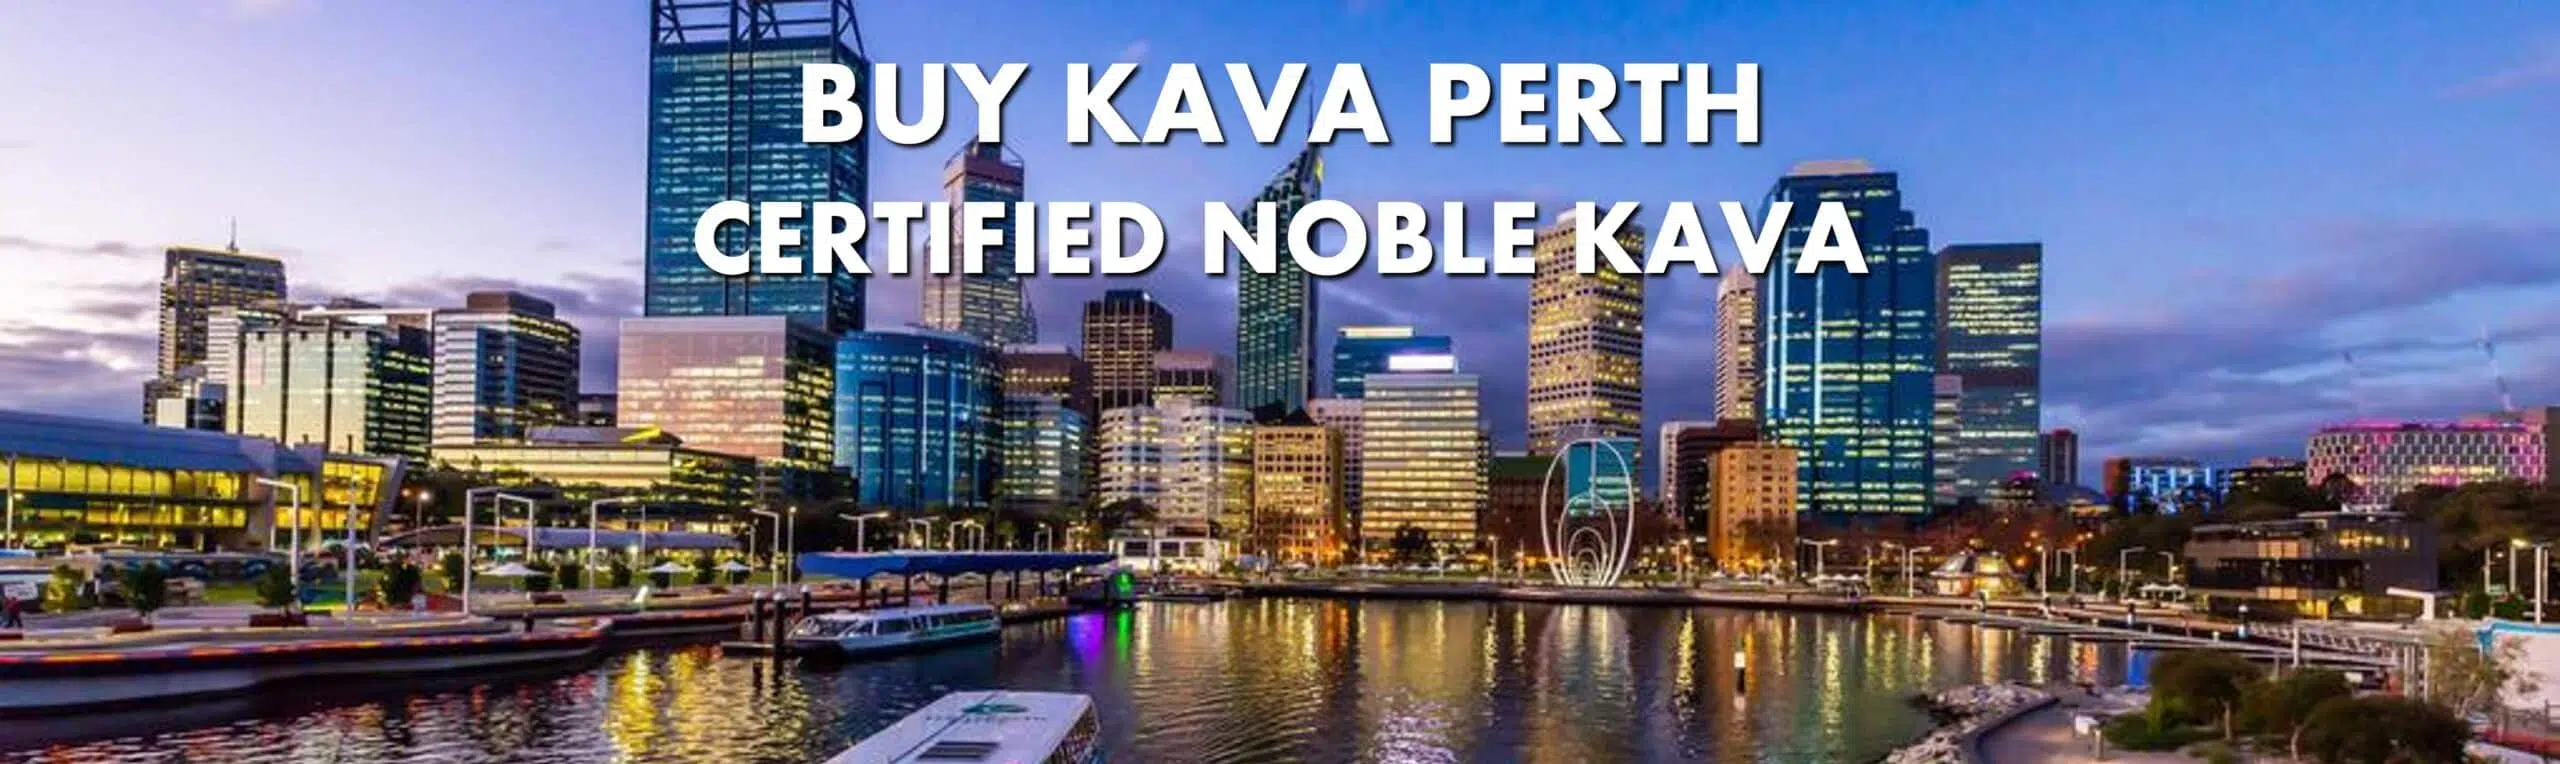 Cityscape of Perth Western Australia with caption Buy Kava Perth Certified Noble Kava